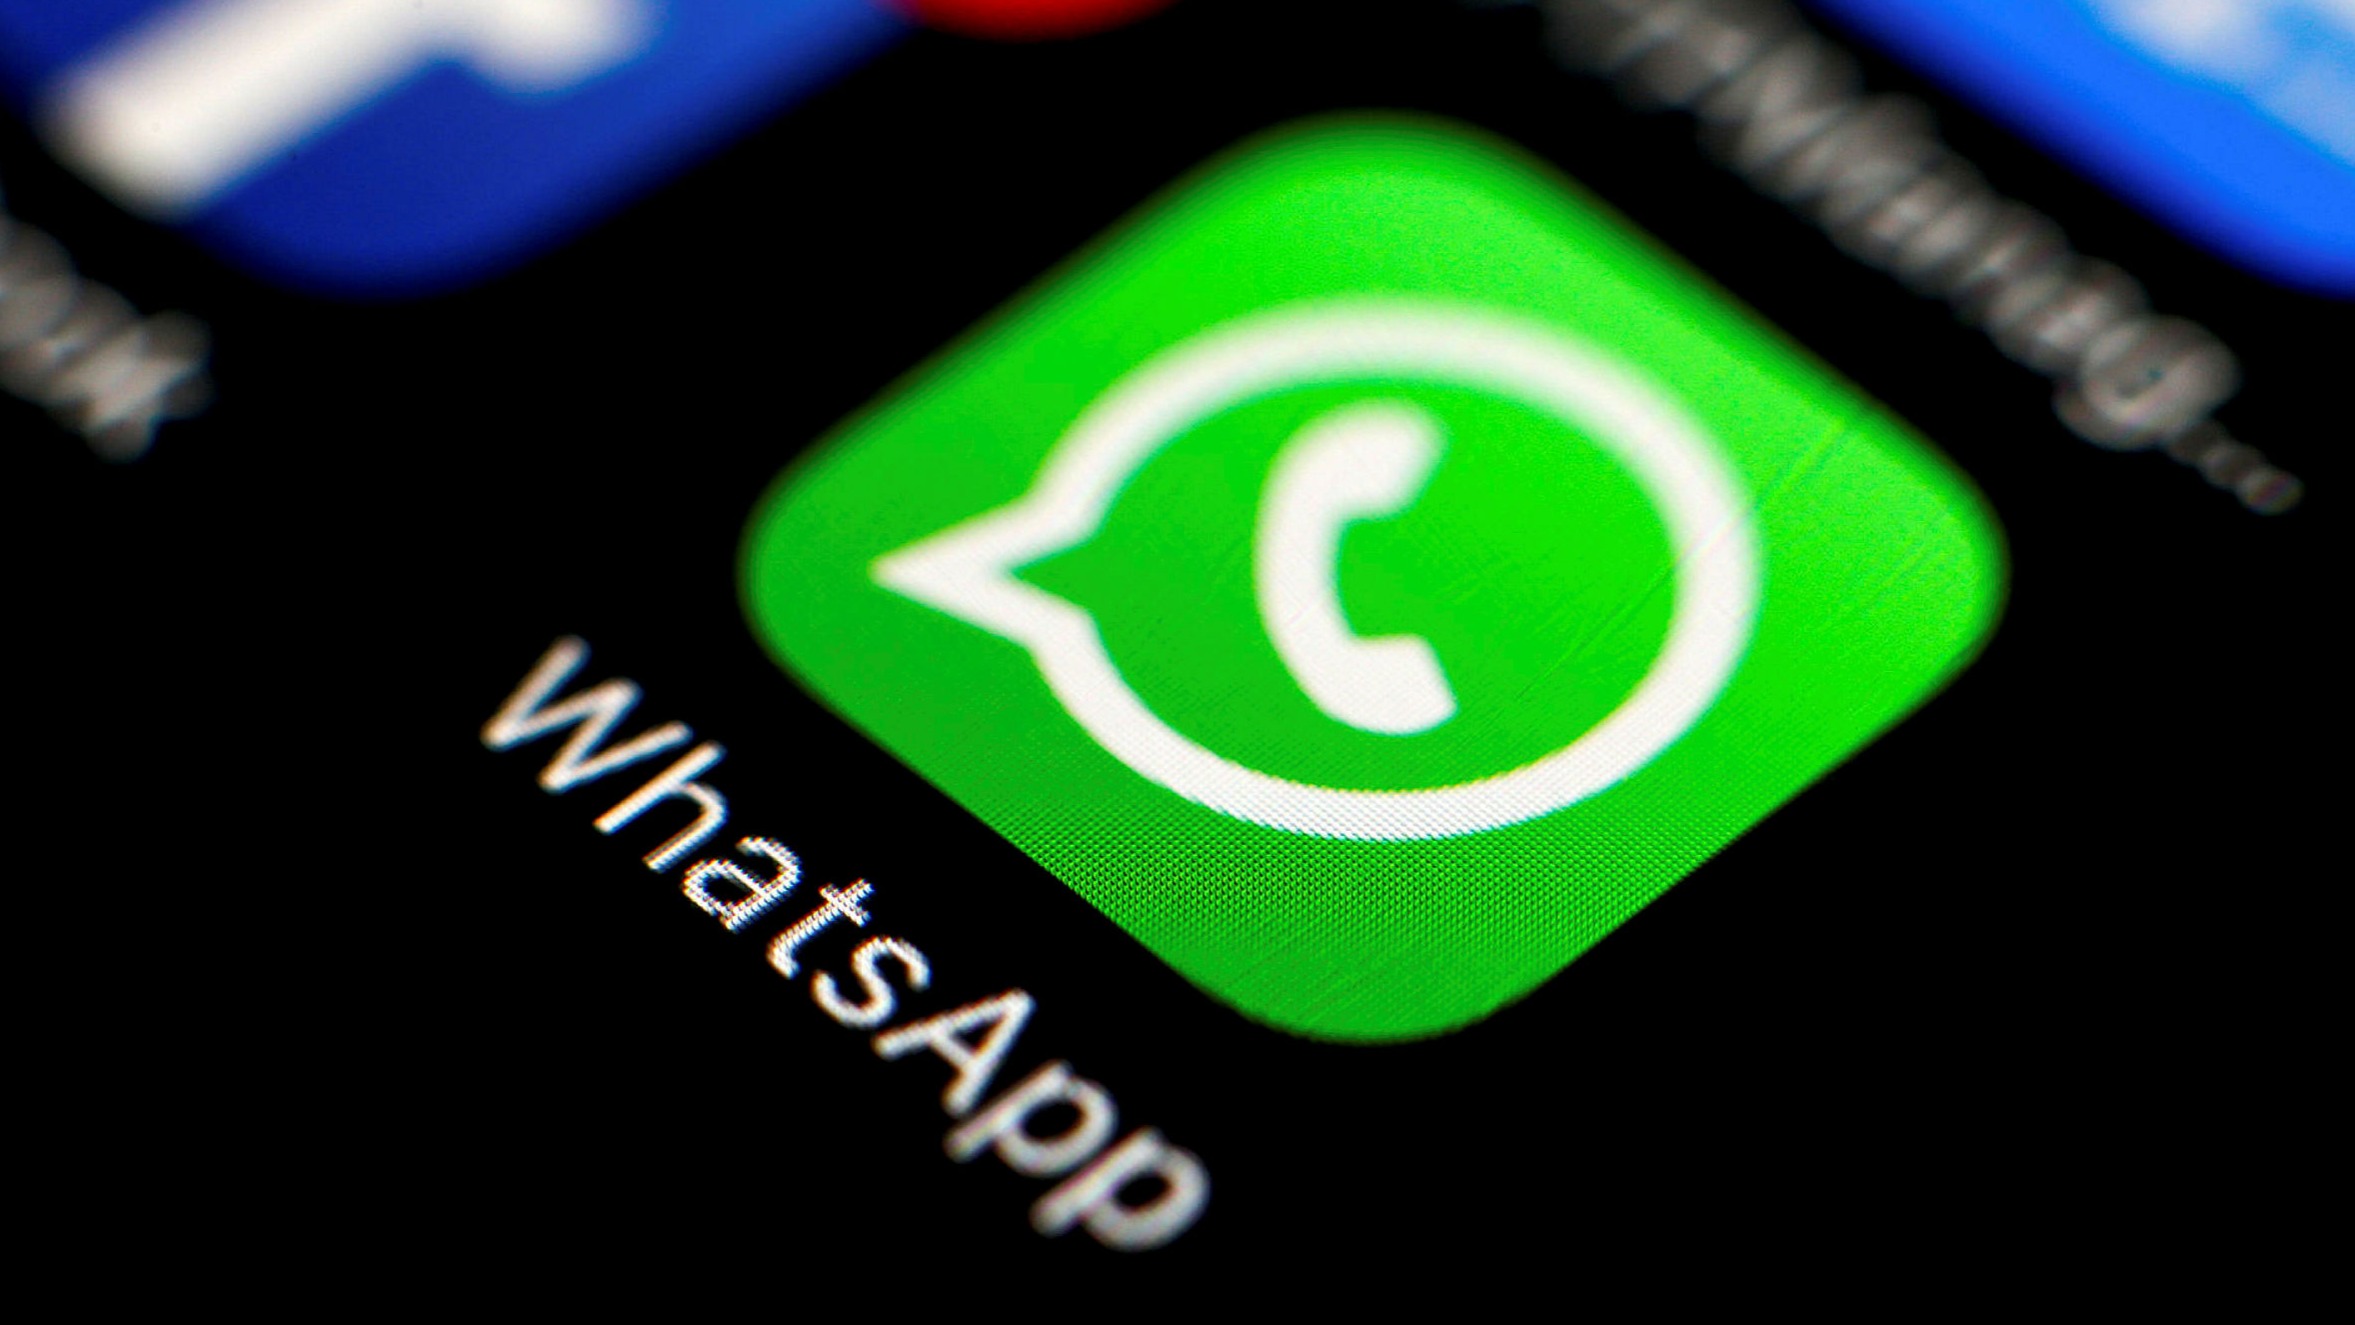 WhatsApp fined €225m for not telling users how it shared data with Facebook | Financial Times